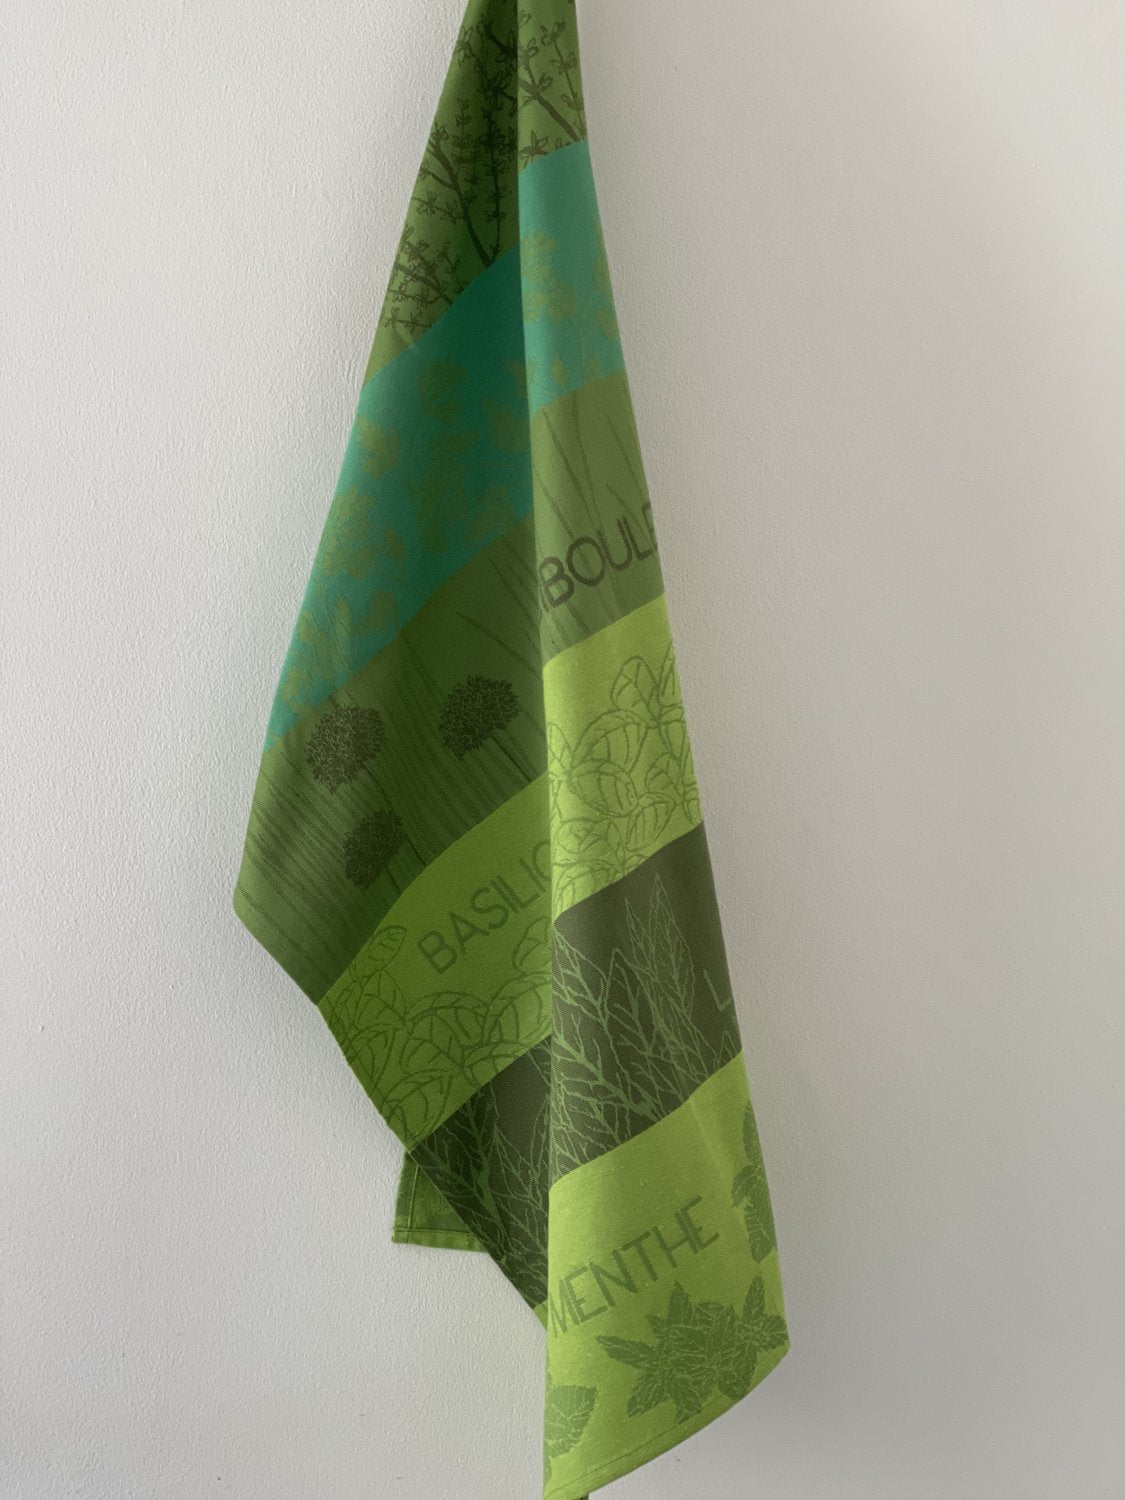 Coucke "Herbes Aromatiques”, Woven cotton tea towel. Designed in France.